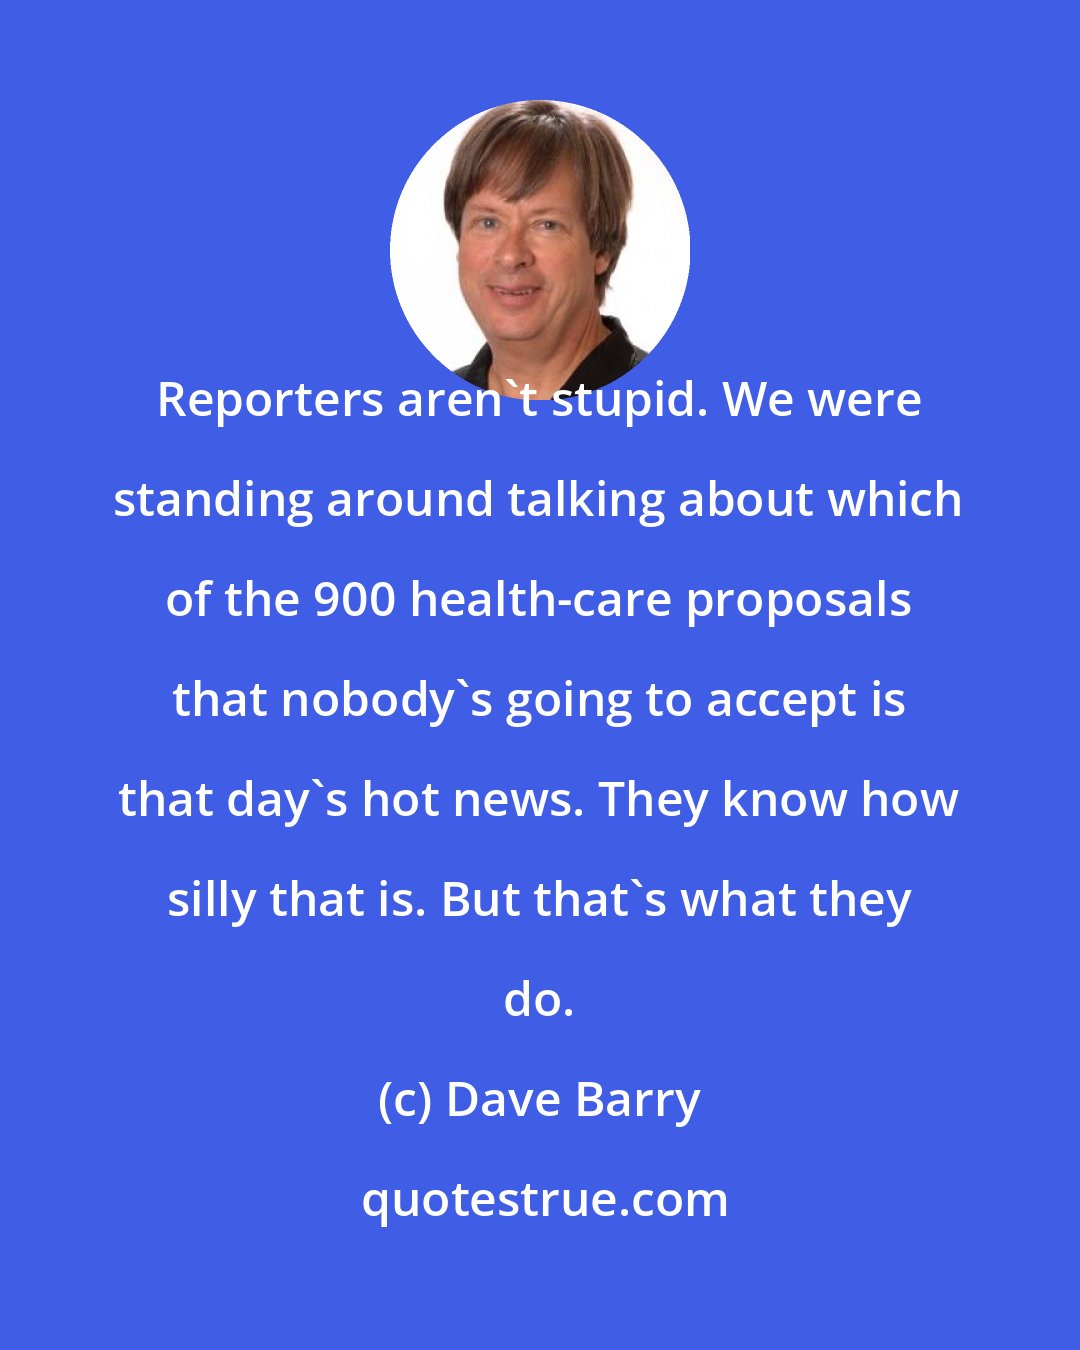 Dave Barry: Reporters aren't stupid. We were standing around talking about which of the 900 health-care proposals that nobody's going to accept is that day's hot news. They know how silly that is. But that's what they do.